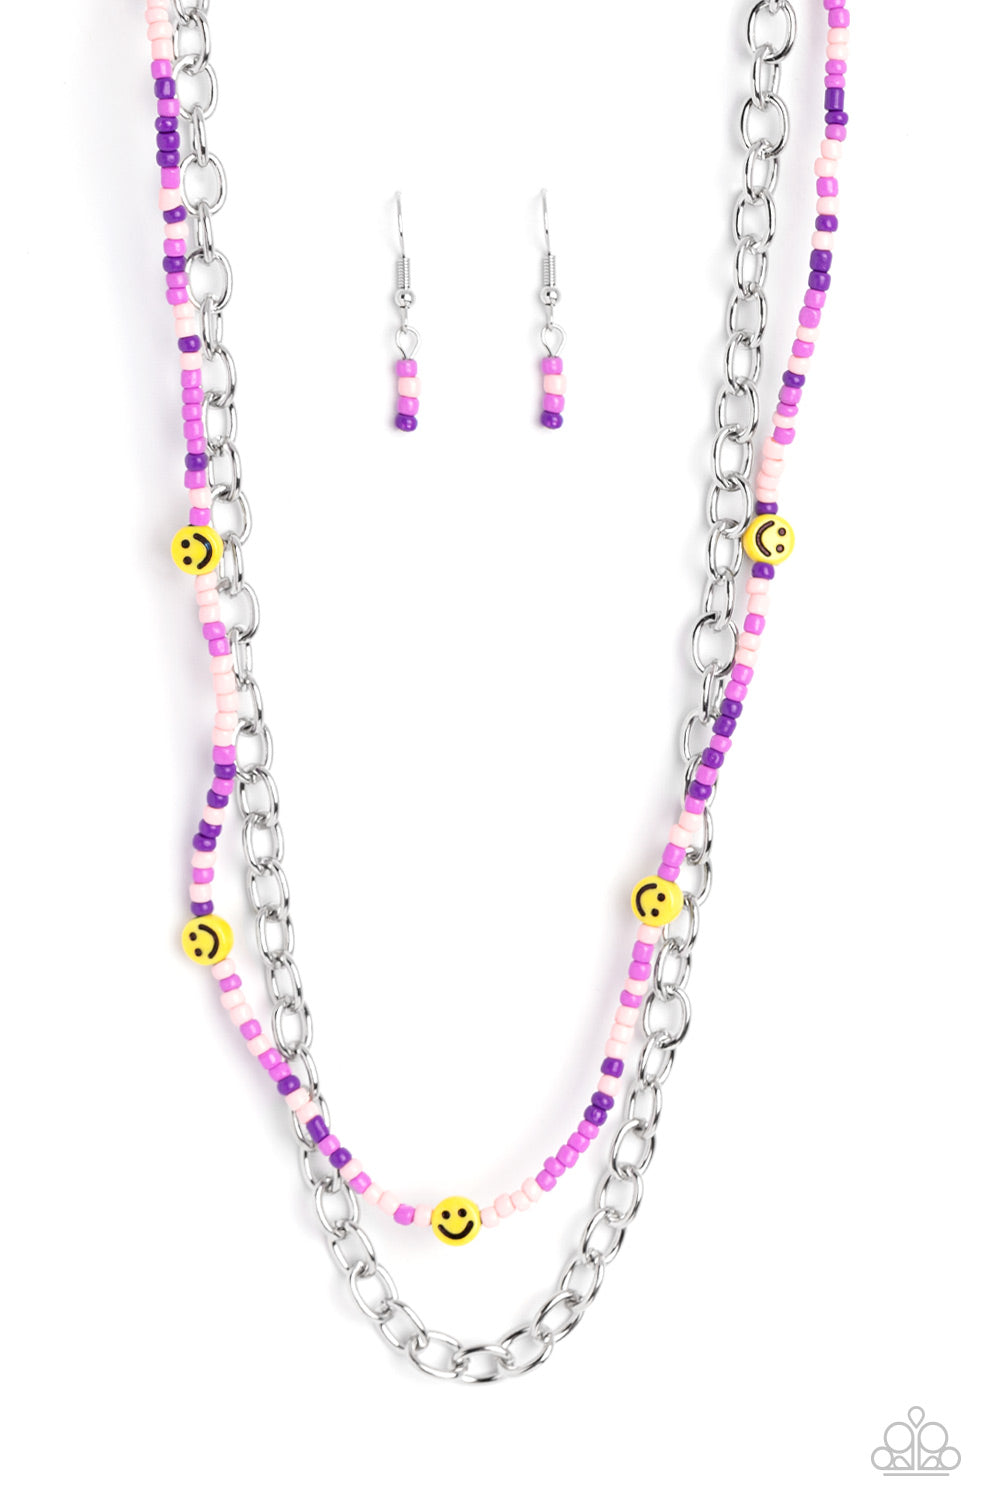 HAPPY LOOKS GOOD ON YOU PURPLE-NECKLACE